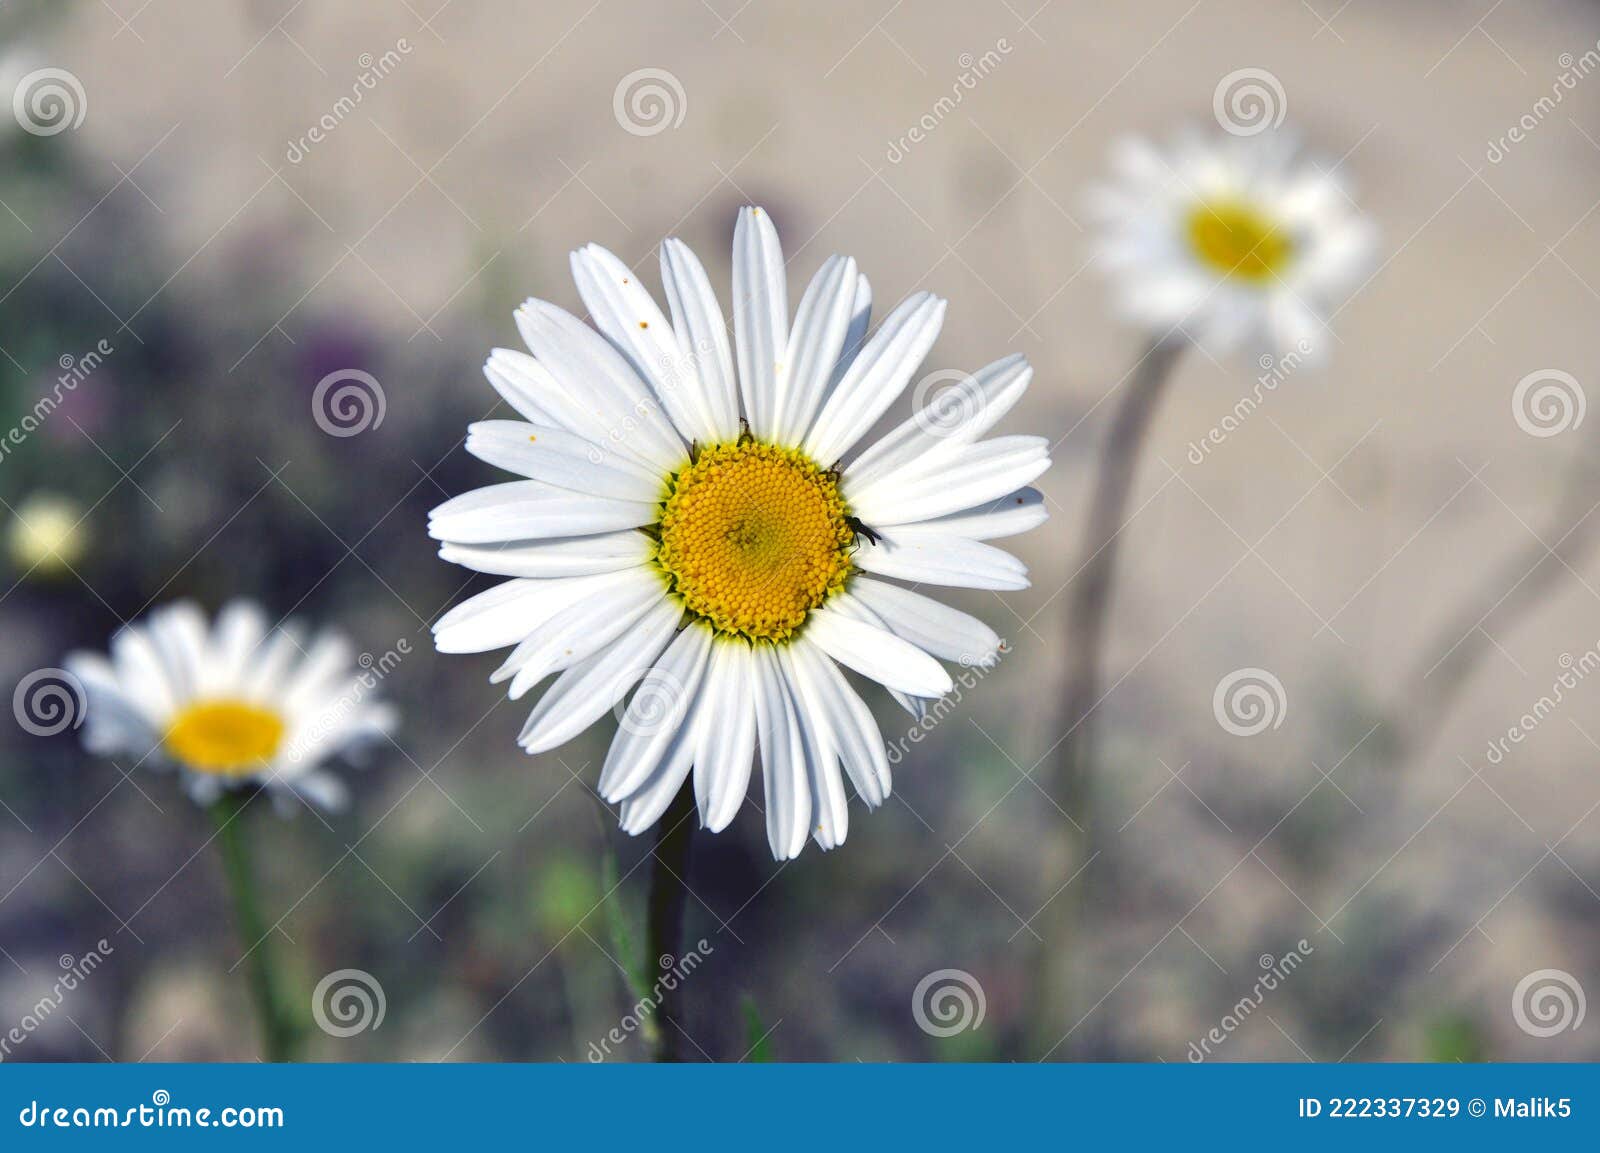 closeup of a little white daisy, perfectly round flower.